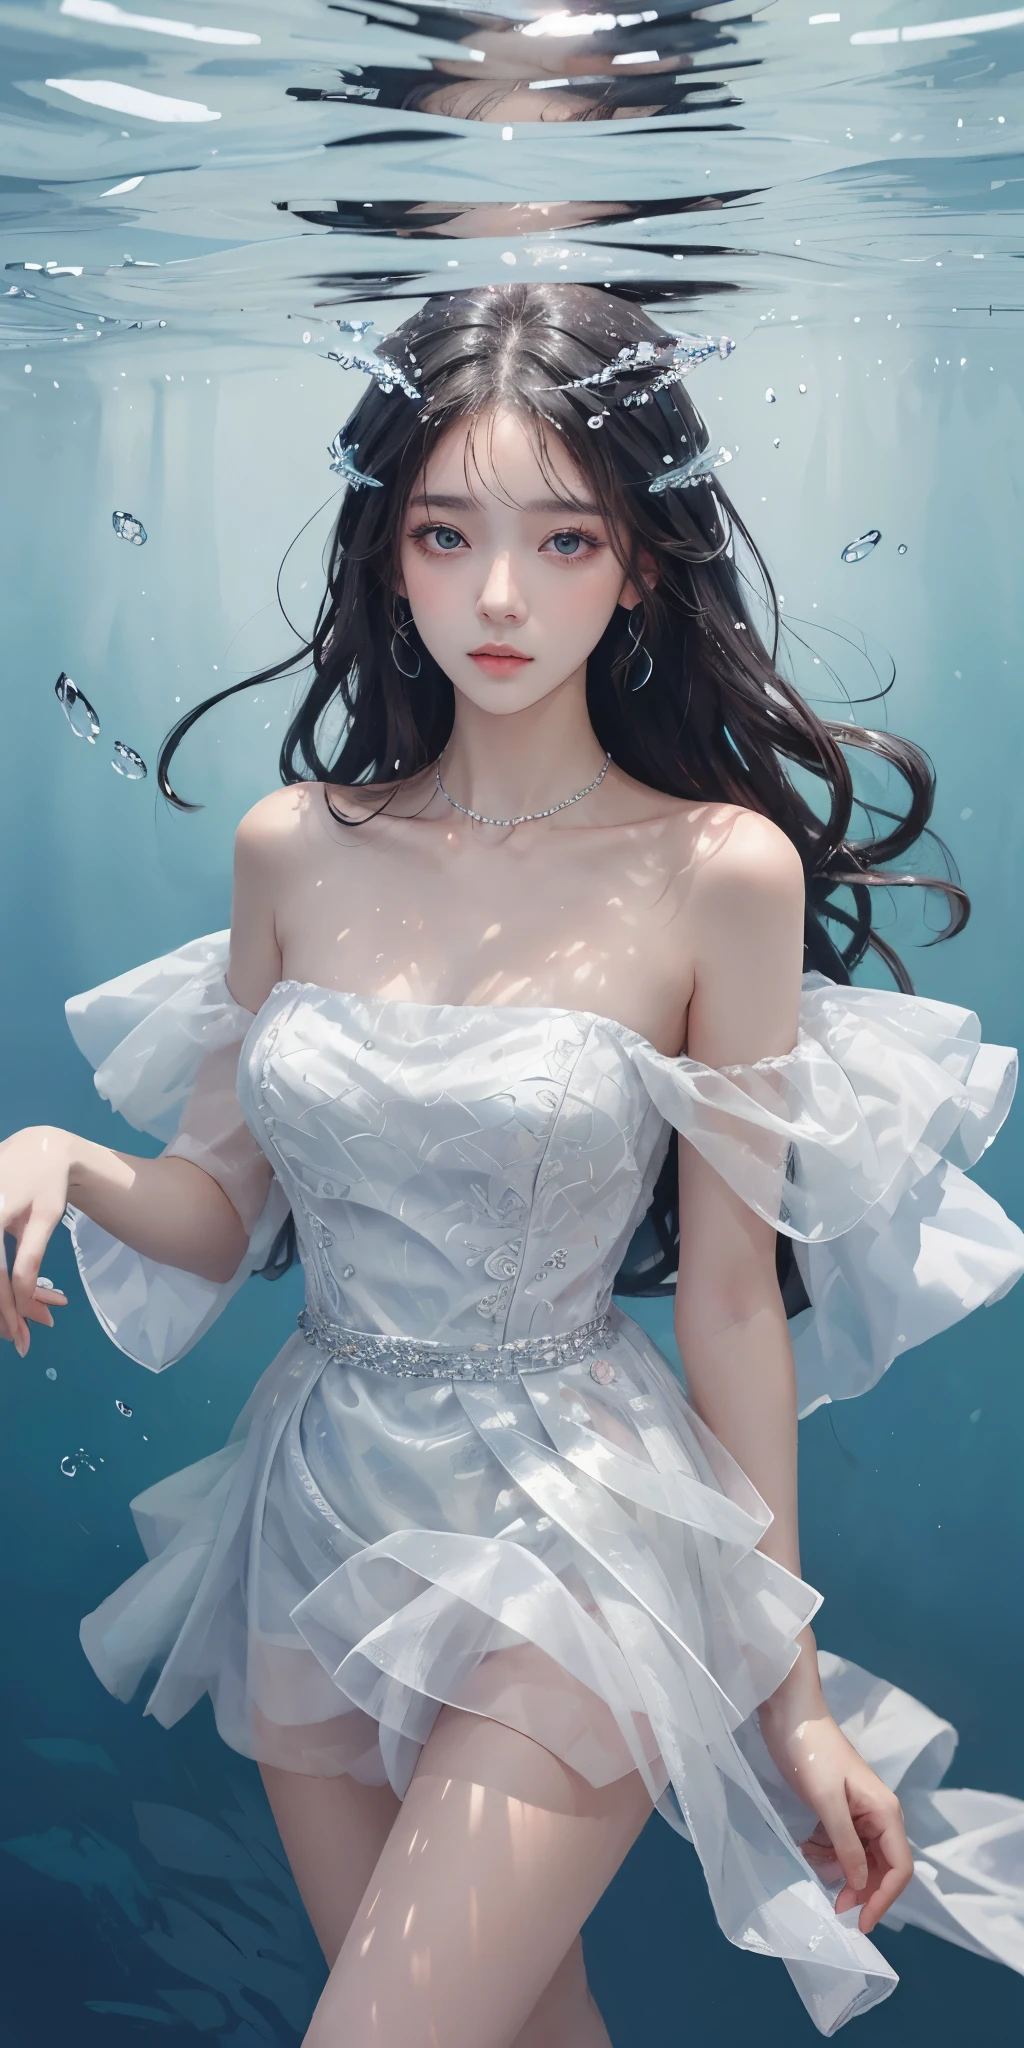 Sweet girl clothes4,strapless dress,jewelry, best quality，masterpiece，ultra high resolution，Clear face,（Realism：1.4），RAW photos，cold light，woman wearing transparent dress underwater，Full body image，wallpaper anime blue water，Gurwitz-style artwork，Close-up fantasy of water magic，author：Yang Jie，Gurwitz，A beautiful artistic illustration，Water Nymphs，Beautiful digital artwork，Beautiful digital illustration，Li Song，A beautiful anime portrait，Bovo&#39;s art style